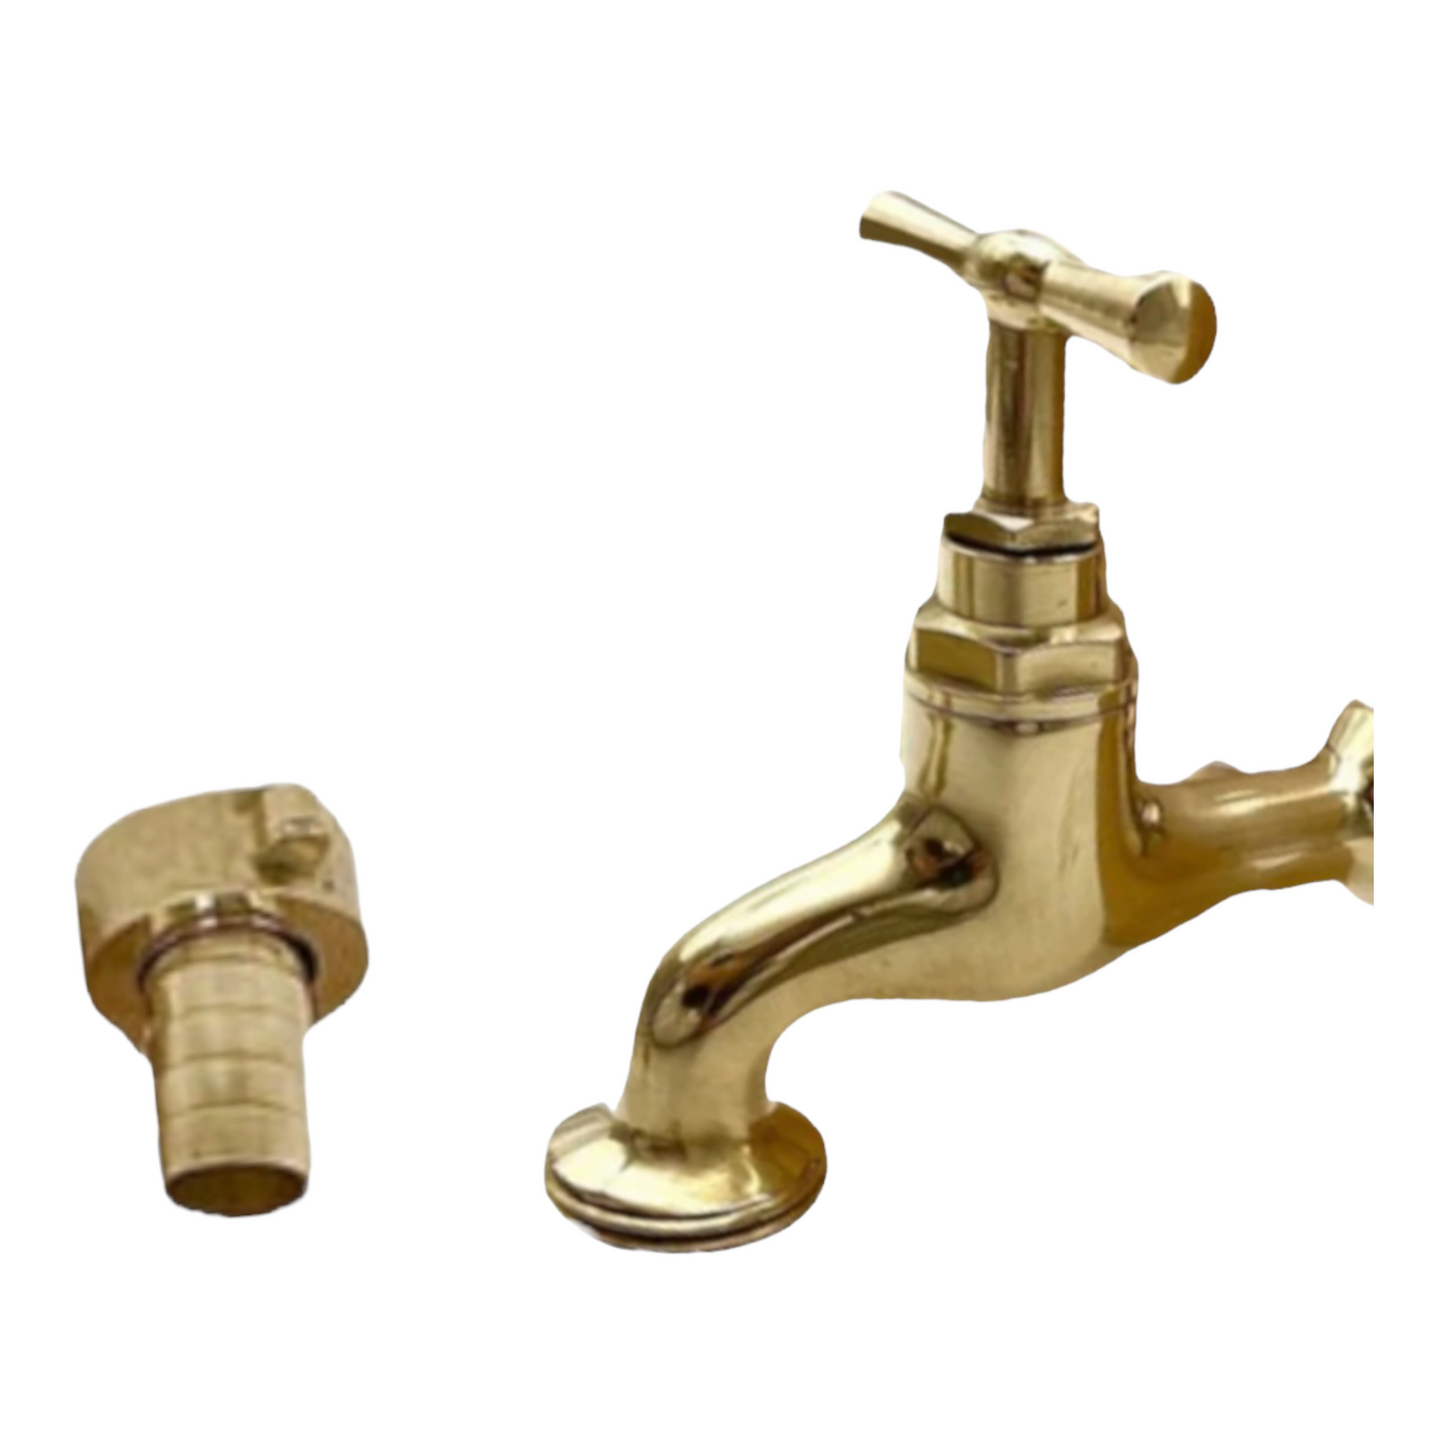 spout of brass wall mounted taps sold by All Things French Store